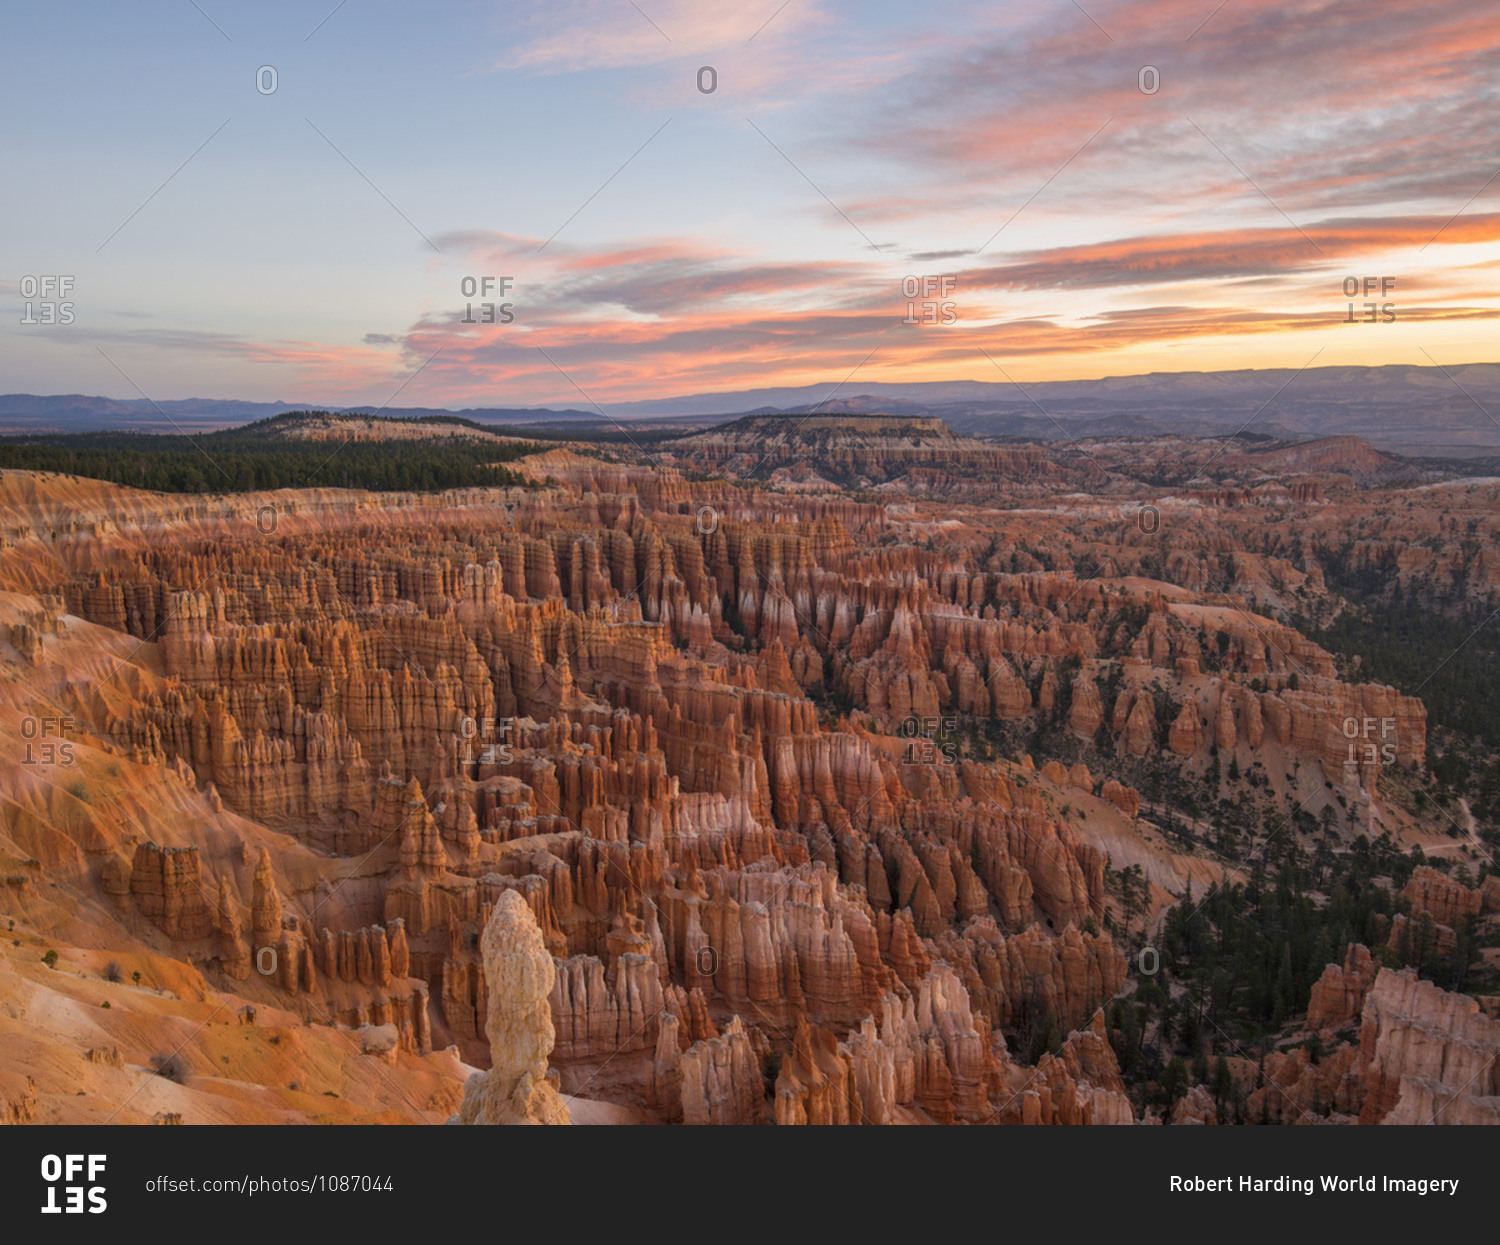 View over the Silent City from the Rim Trail at Inspiration Point, dawn, Bryce Canyon National Park, Utah, United States of America, North America